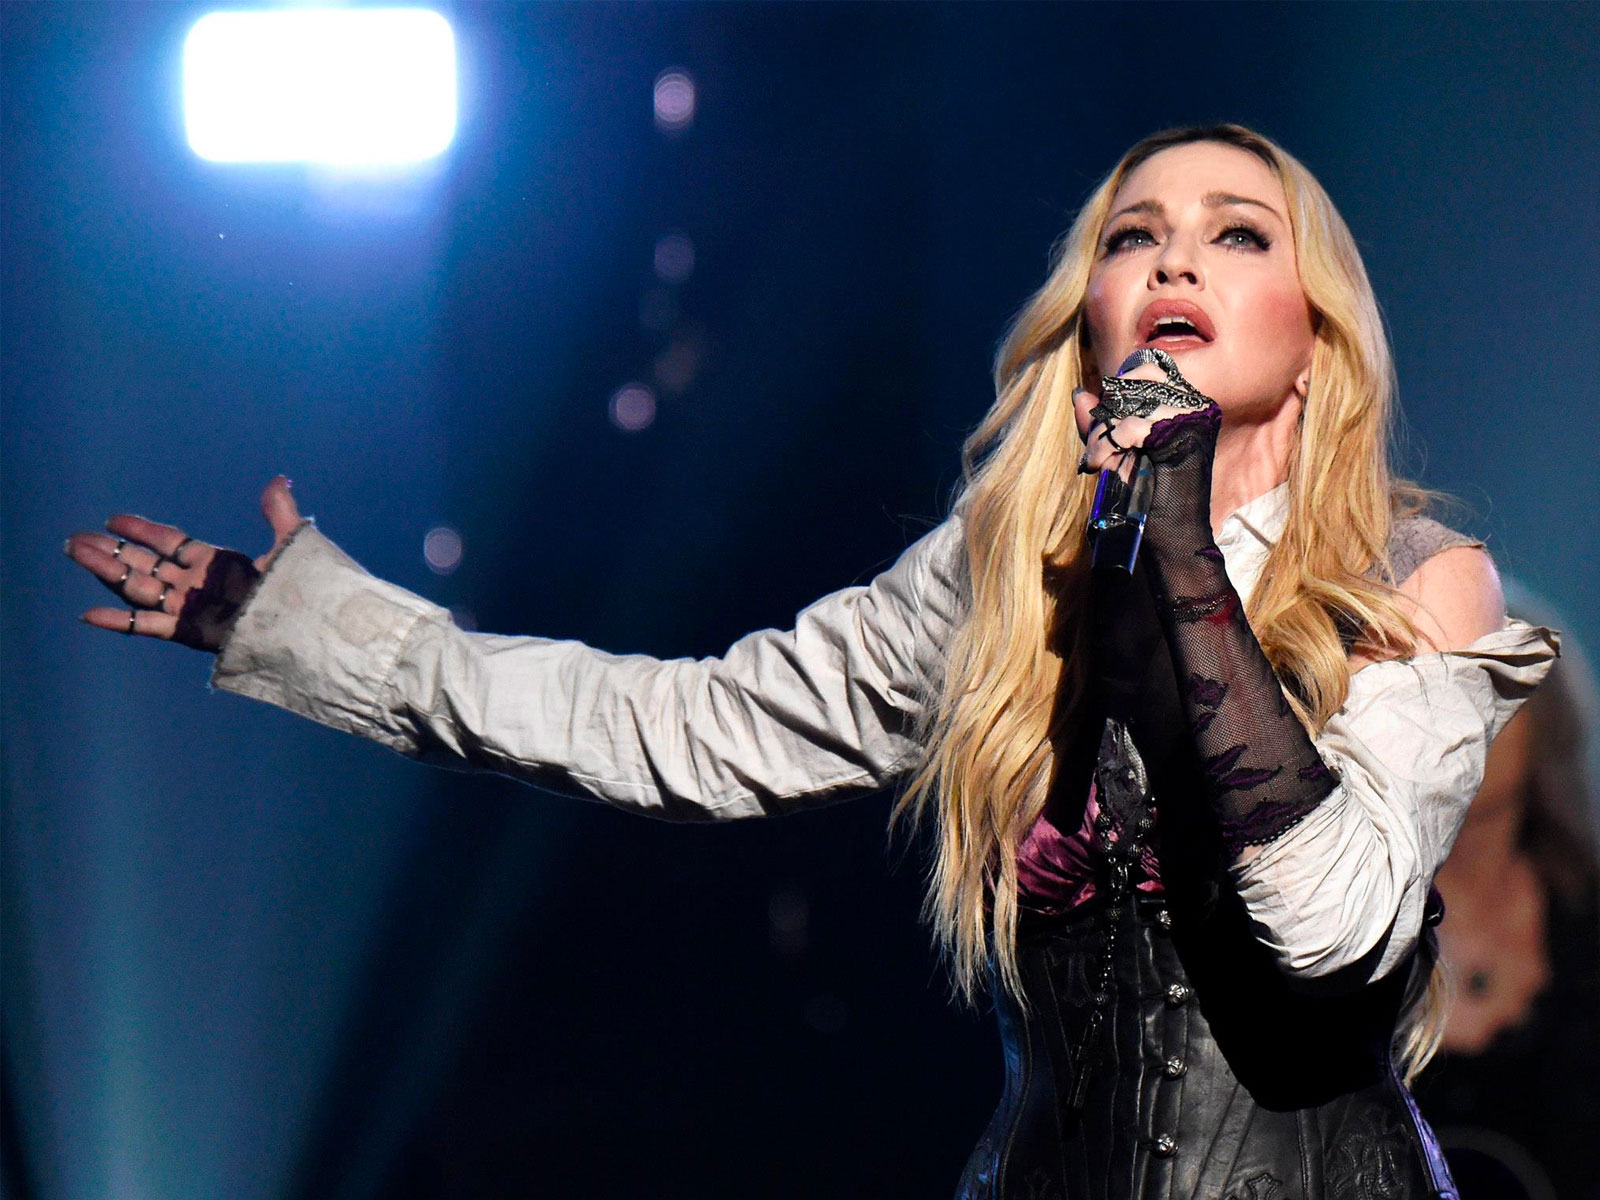 Can You Answer All 20 of These Super Easy Trivia Questions Correctly? Madonna1